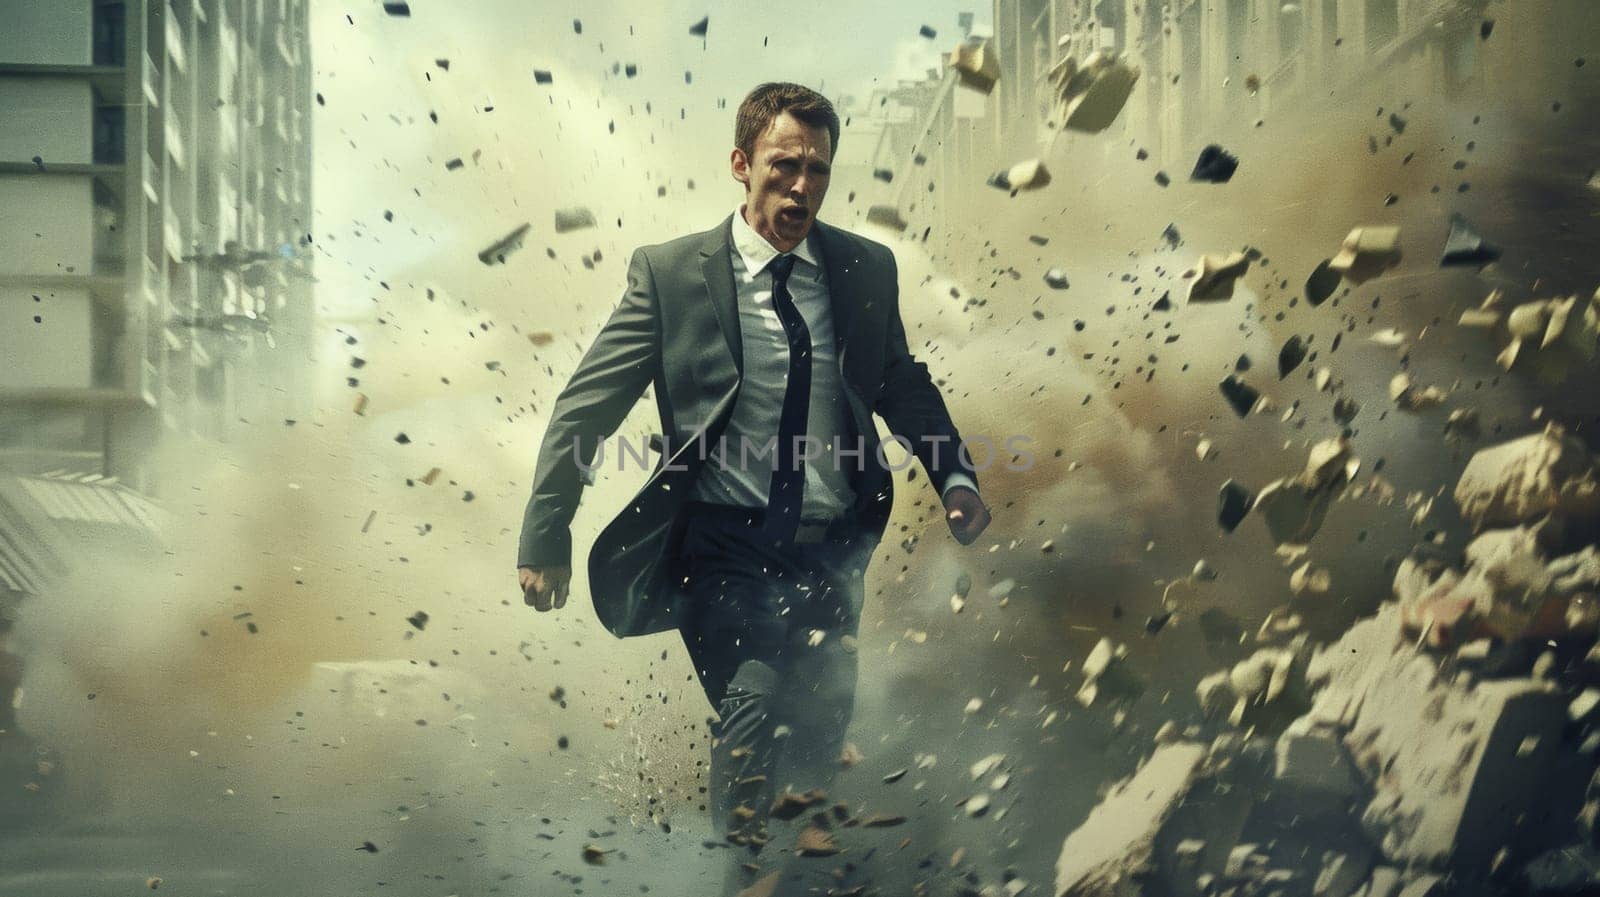 A man in a suit and tie running through the city